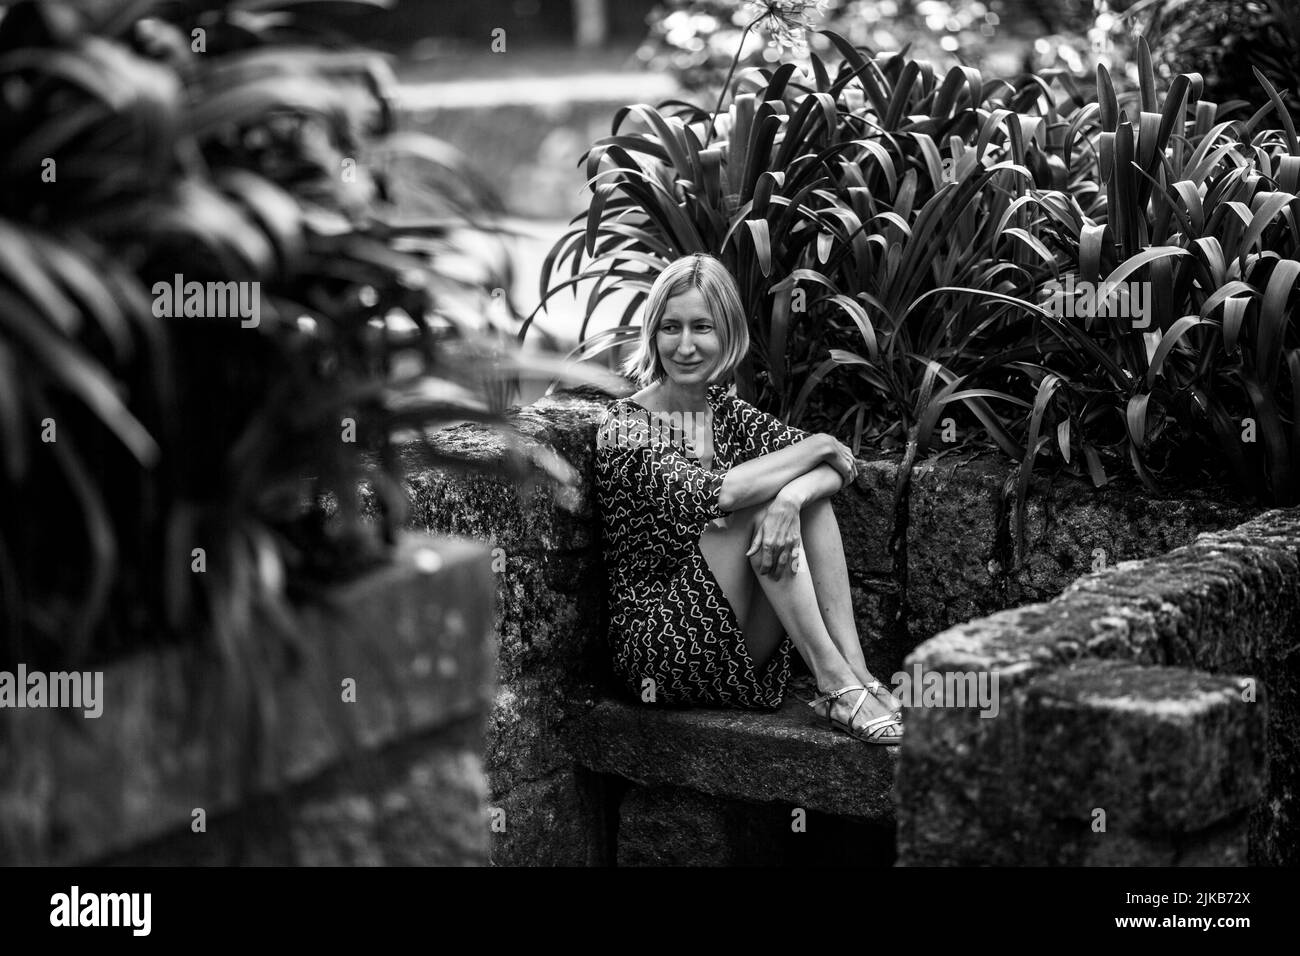 A woman on a stone bench in old parkl. Black and white photo. Stock Photo